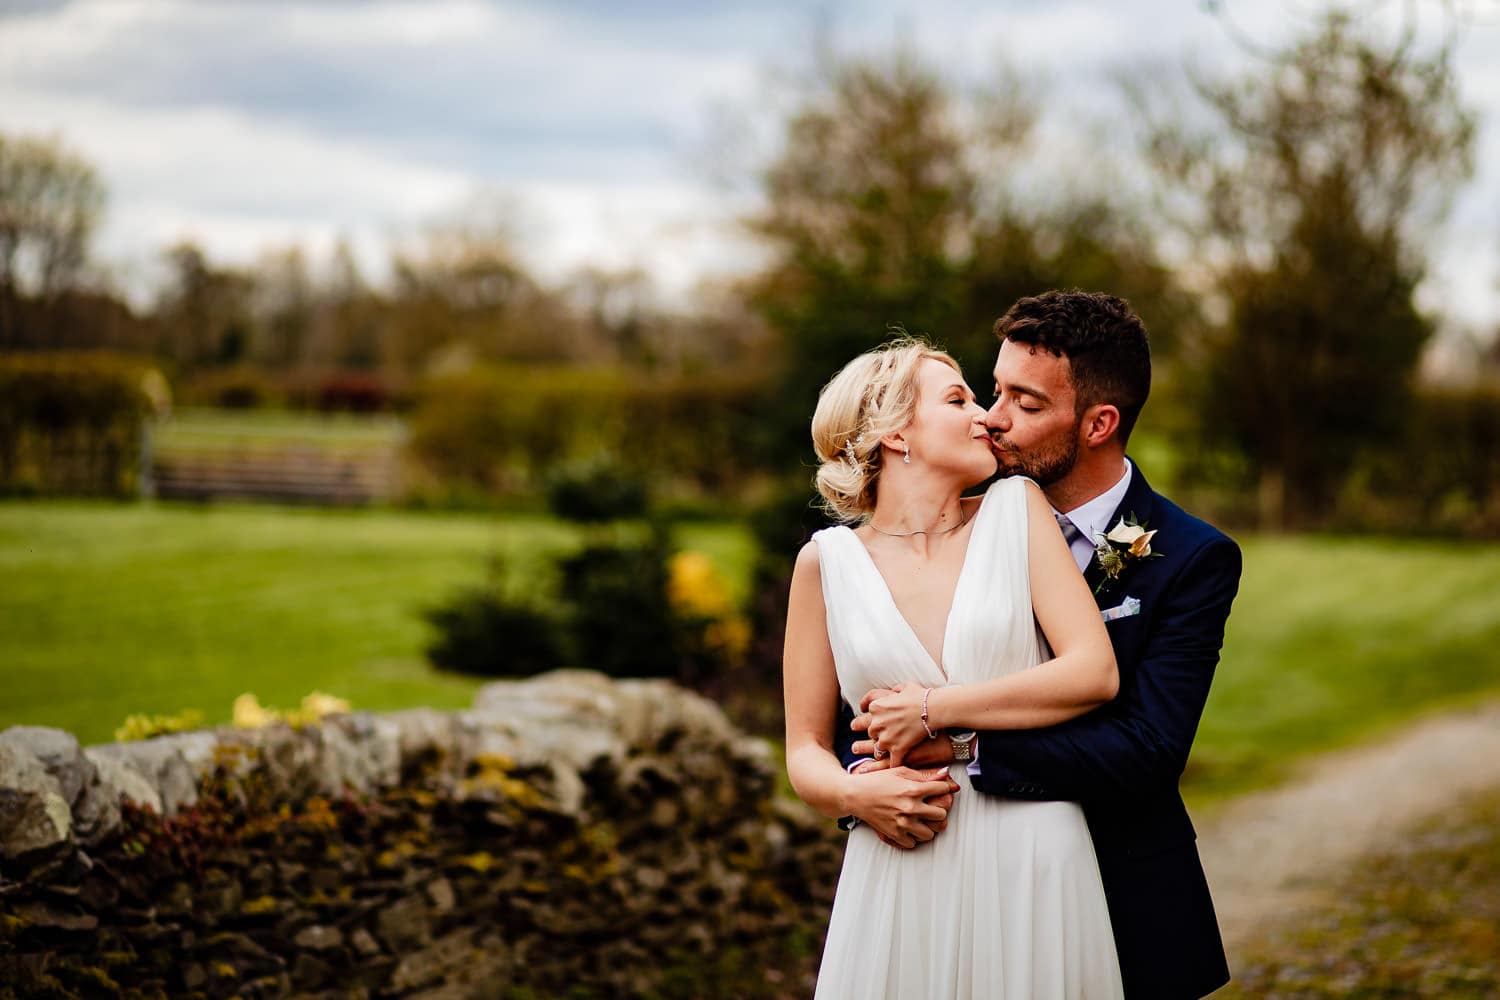 Bride and groom kiss during wedding portraits in Leicestershire countryside - captured by Chapter One Photography